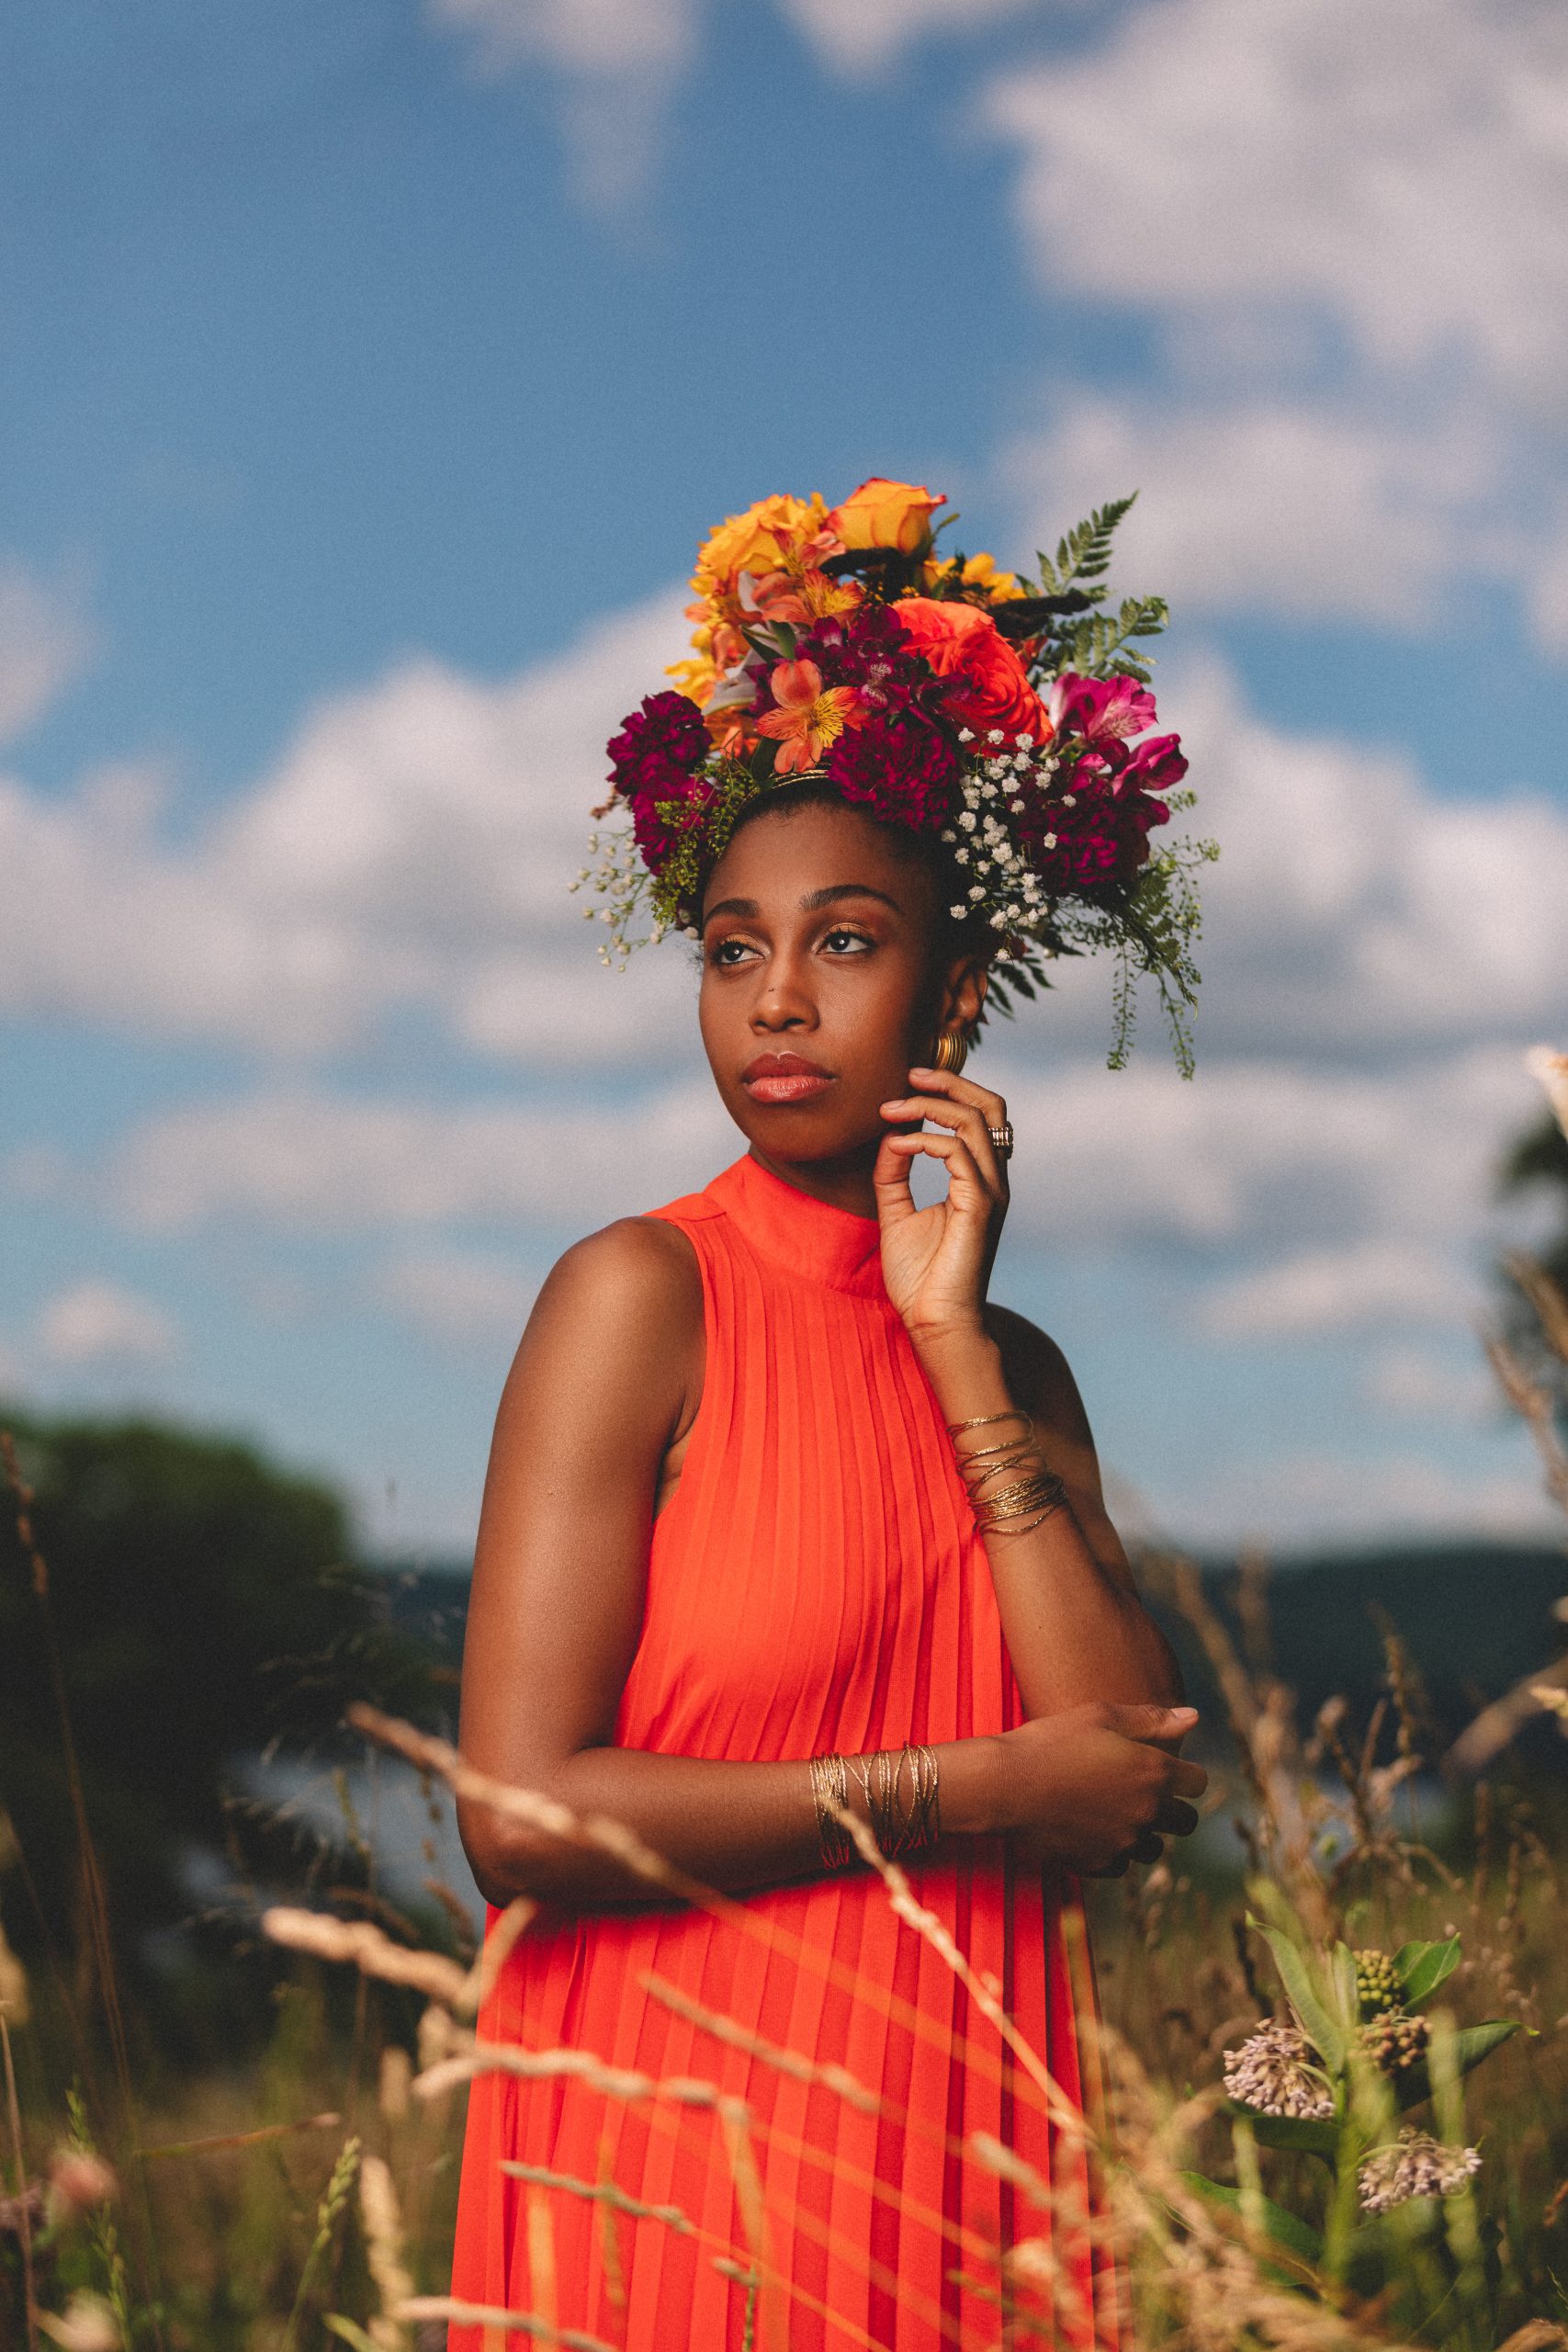 Jazzmeia Horn, standing in tall grass and wearing a bright orange dress, looks off to the left